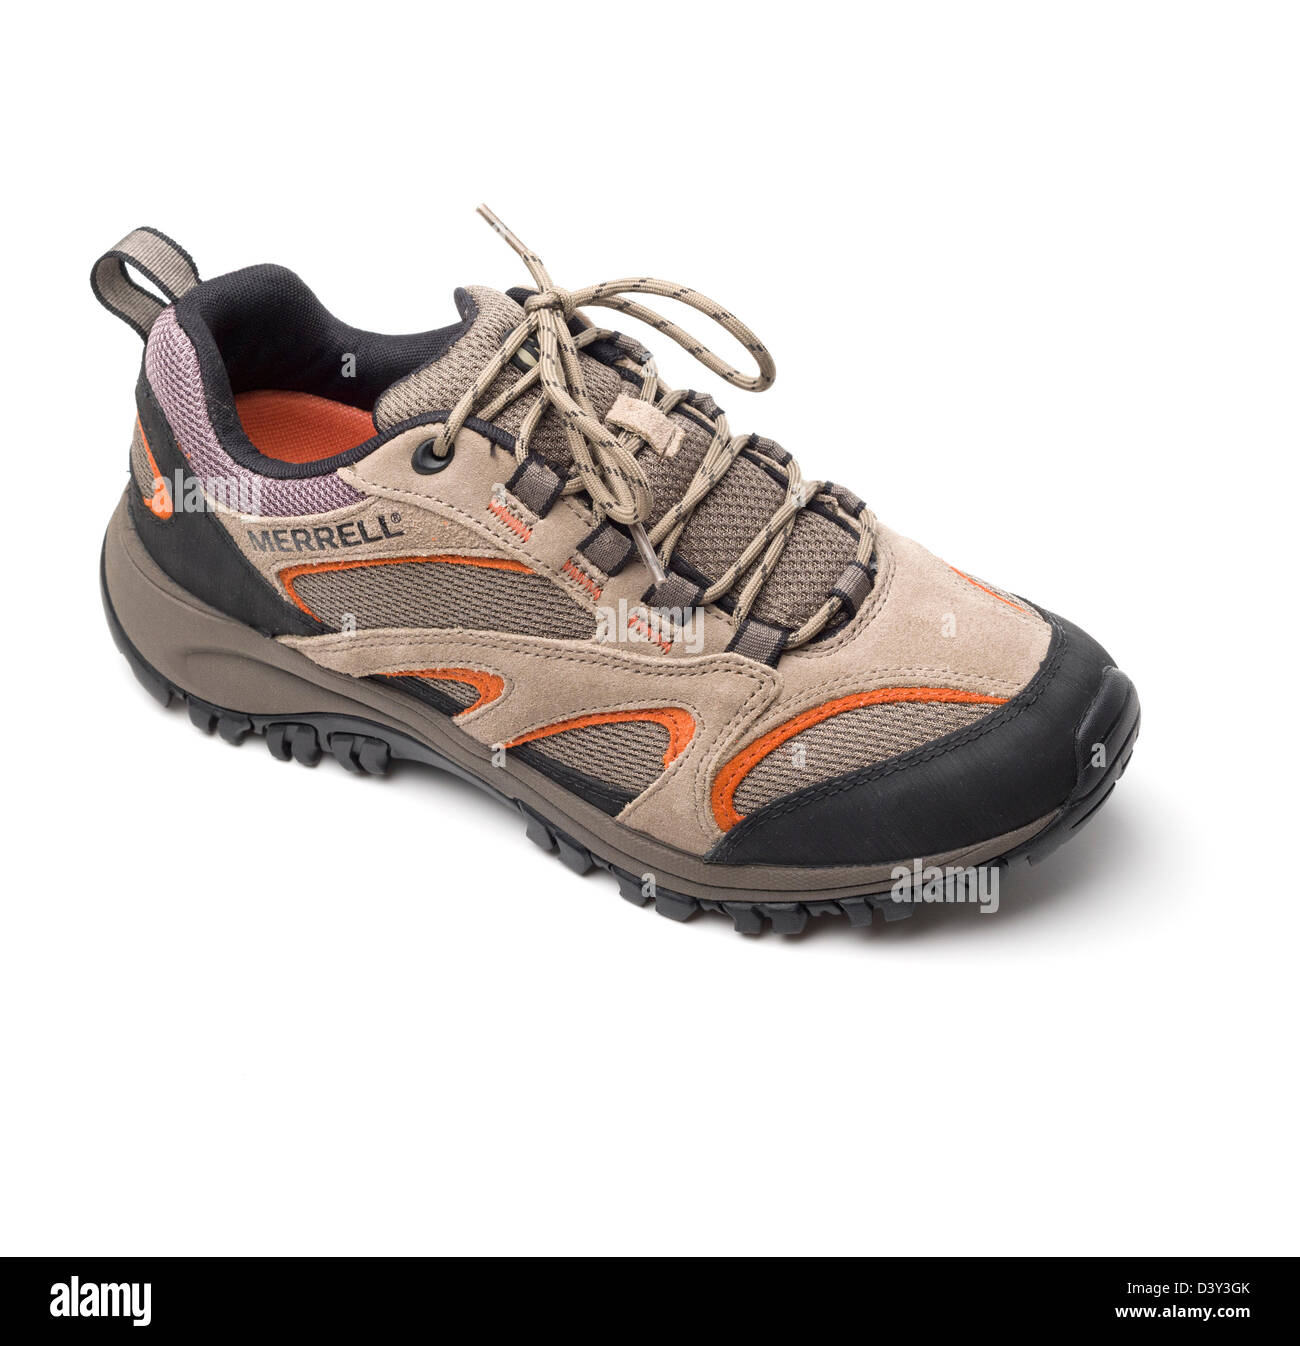 Merrell Cut Out & Pictures - Alamy